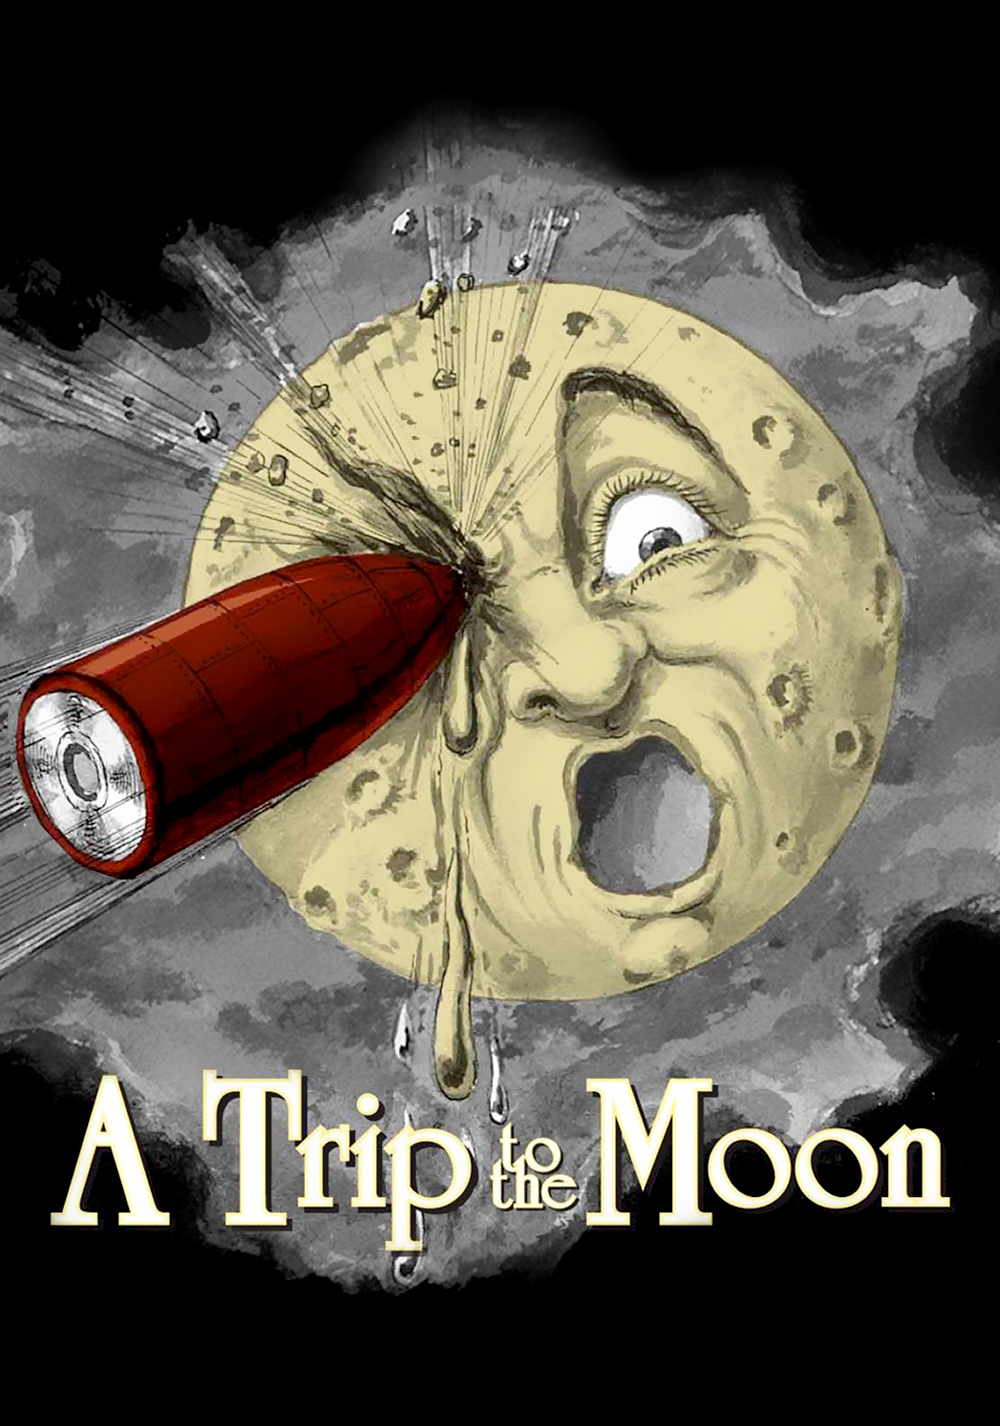 A Trip to the Moon Art